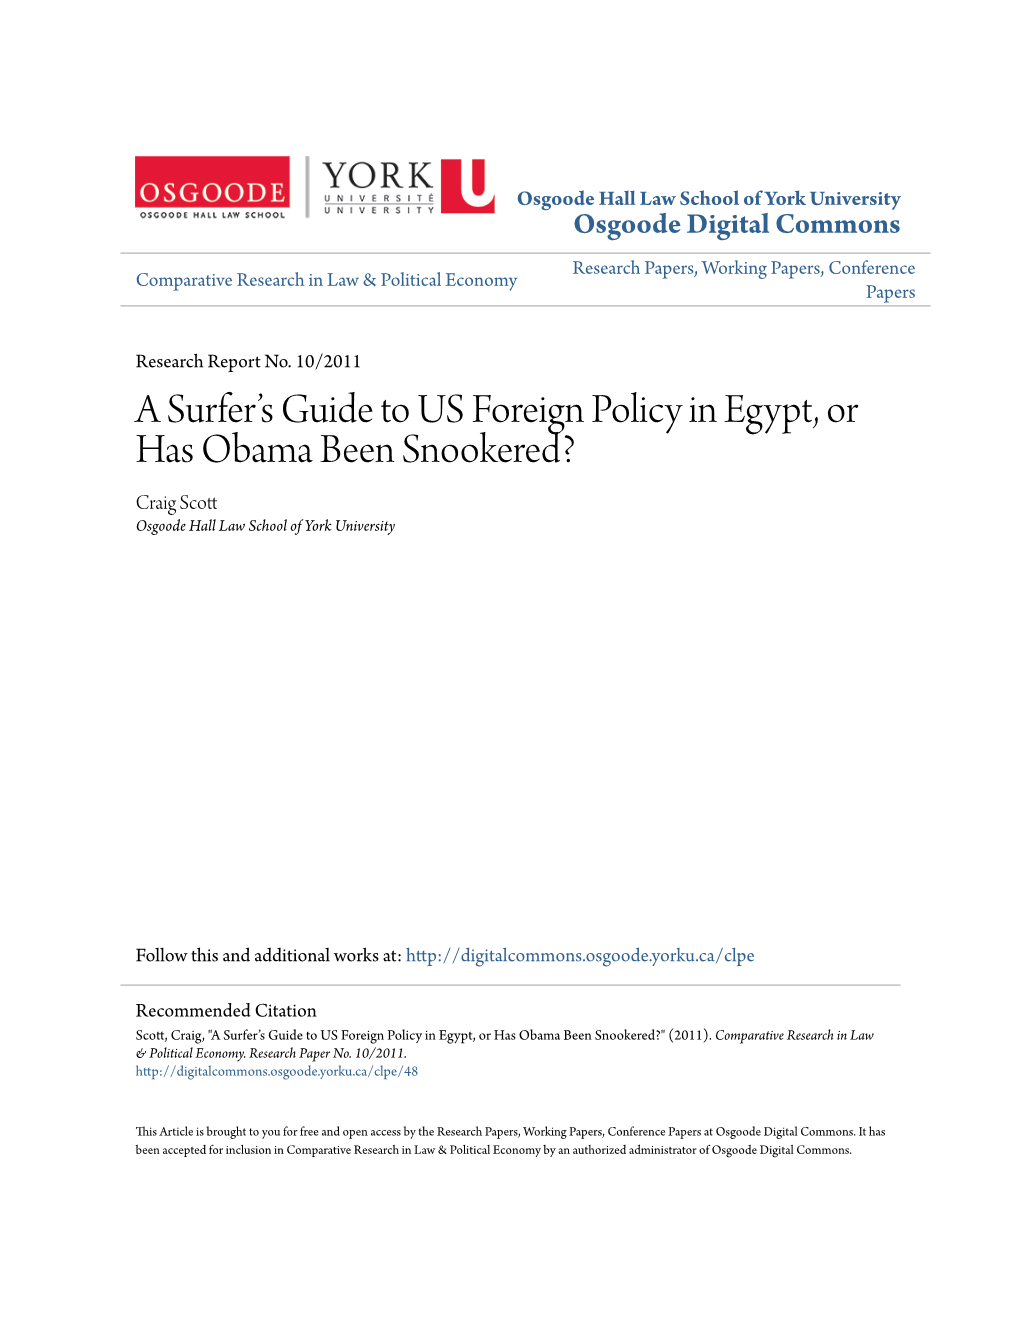 A Surfer's Guide to US Foreign Policy in Egypt, Or Has Obama Been